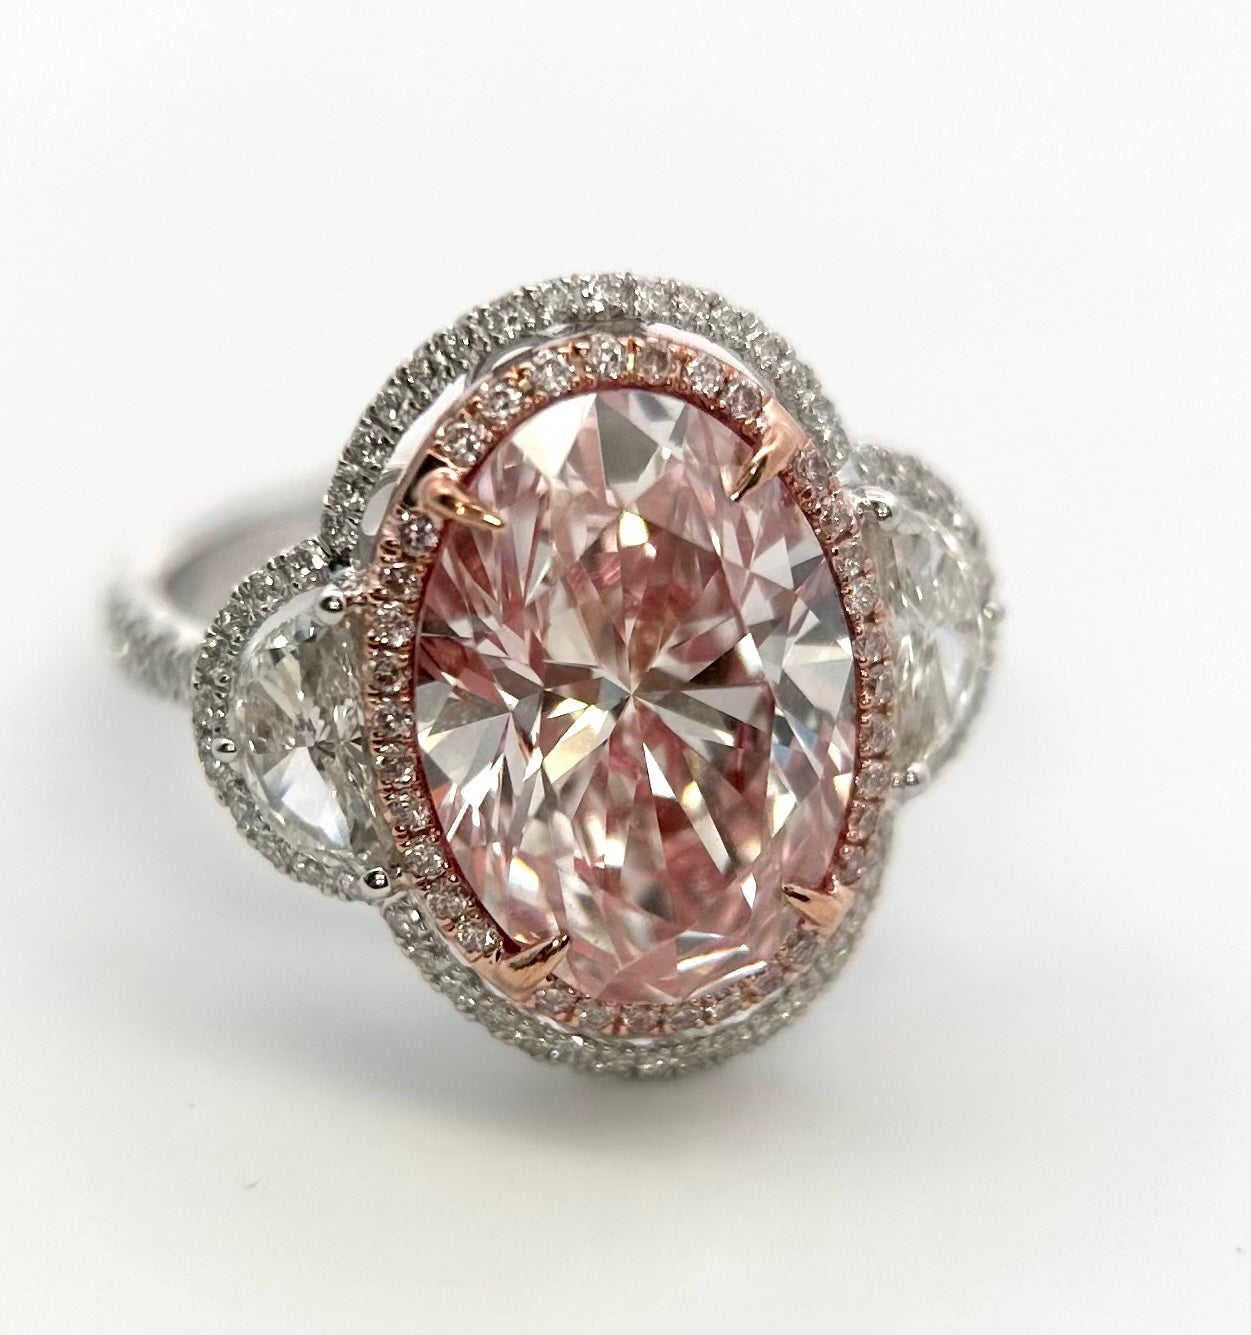 Extremely rare and highly sought after, estate GIA Certified Type 2a or IIa large oval cut 6.00 carat natural pink diamond and white diamond three stone ring set in 18 karat white and rose gold. This is a very noteworthy and very collectible natural